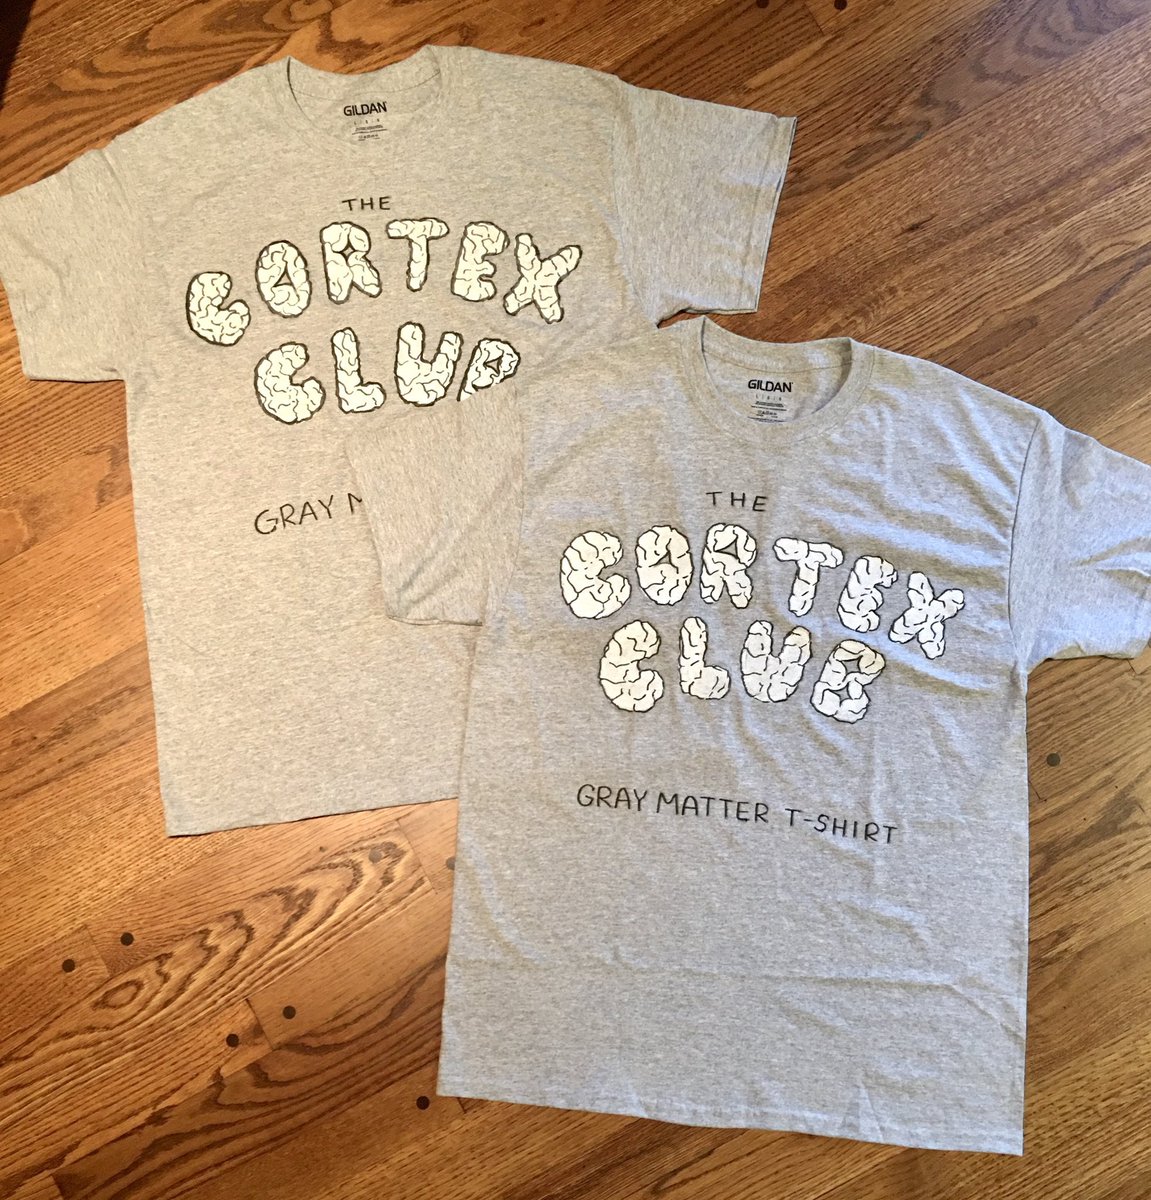 Coming for #AUR2024 @AURtweet to Boston? Don’t forget to pack your @thecortexclub t-shirts! We will be meeting for a photo-op on Wednesday at 12 Noon at the Marriott Copley Place. @MohitAgNeurorad @totallyskates